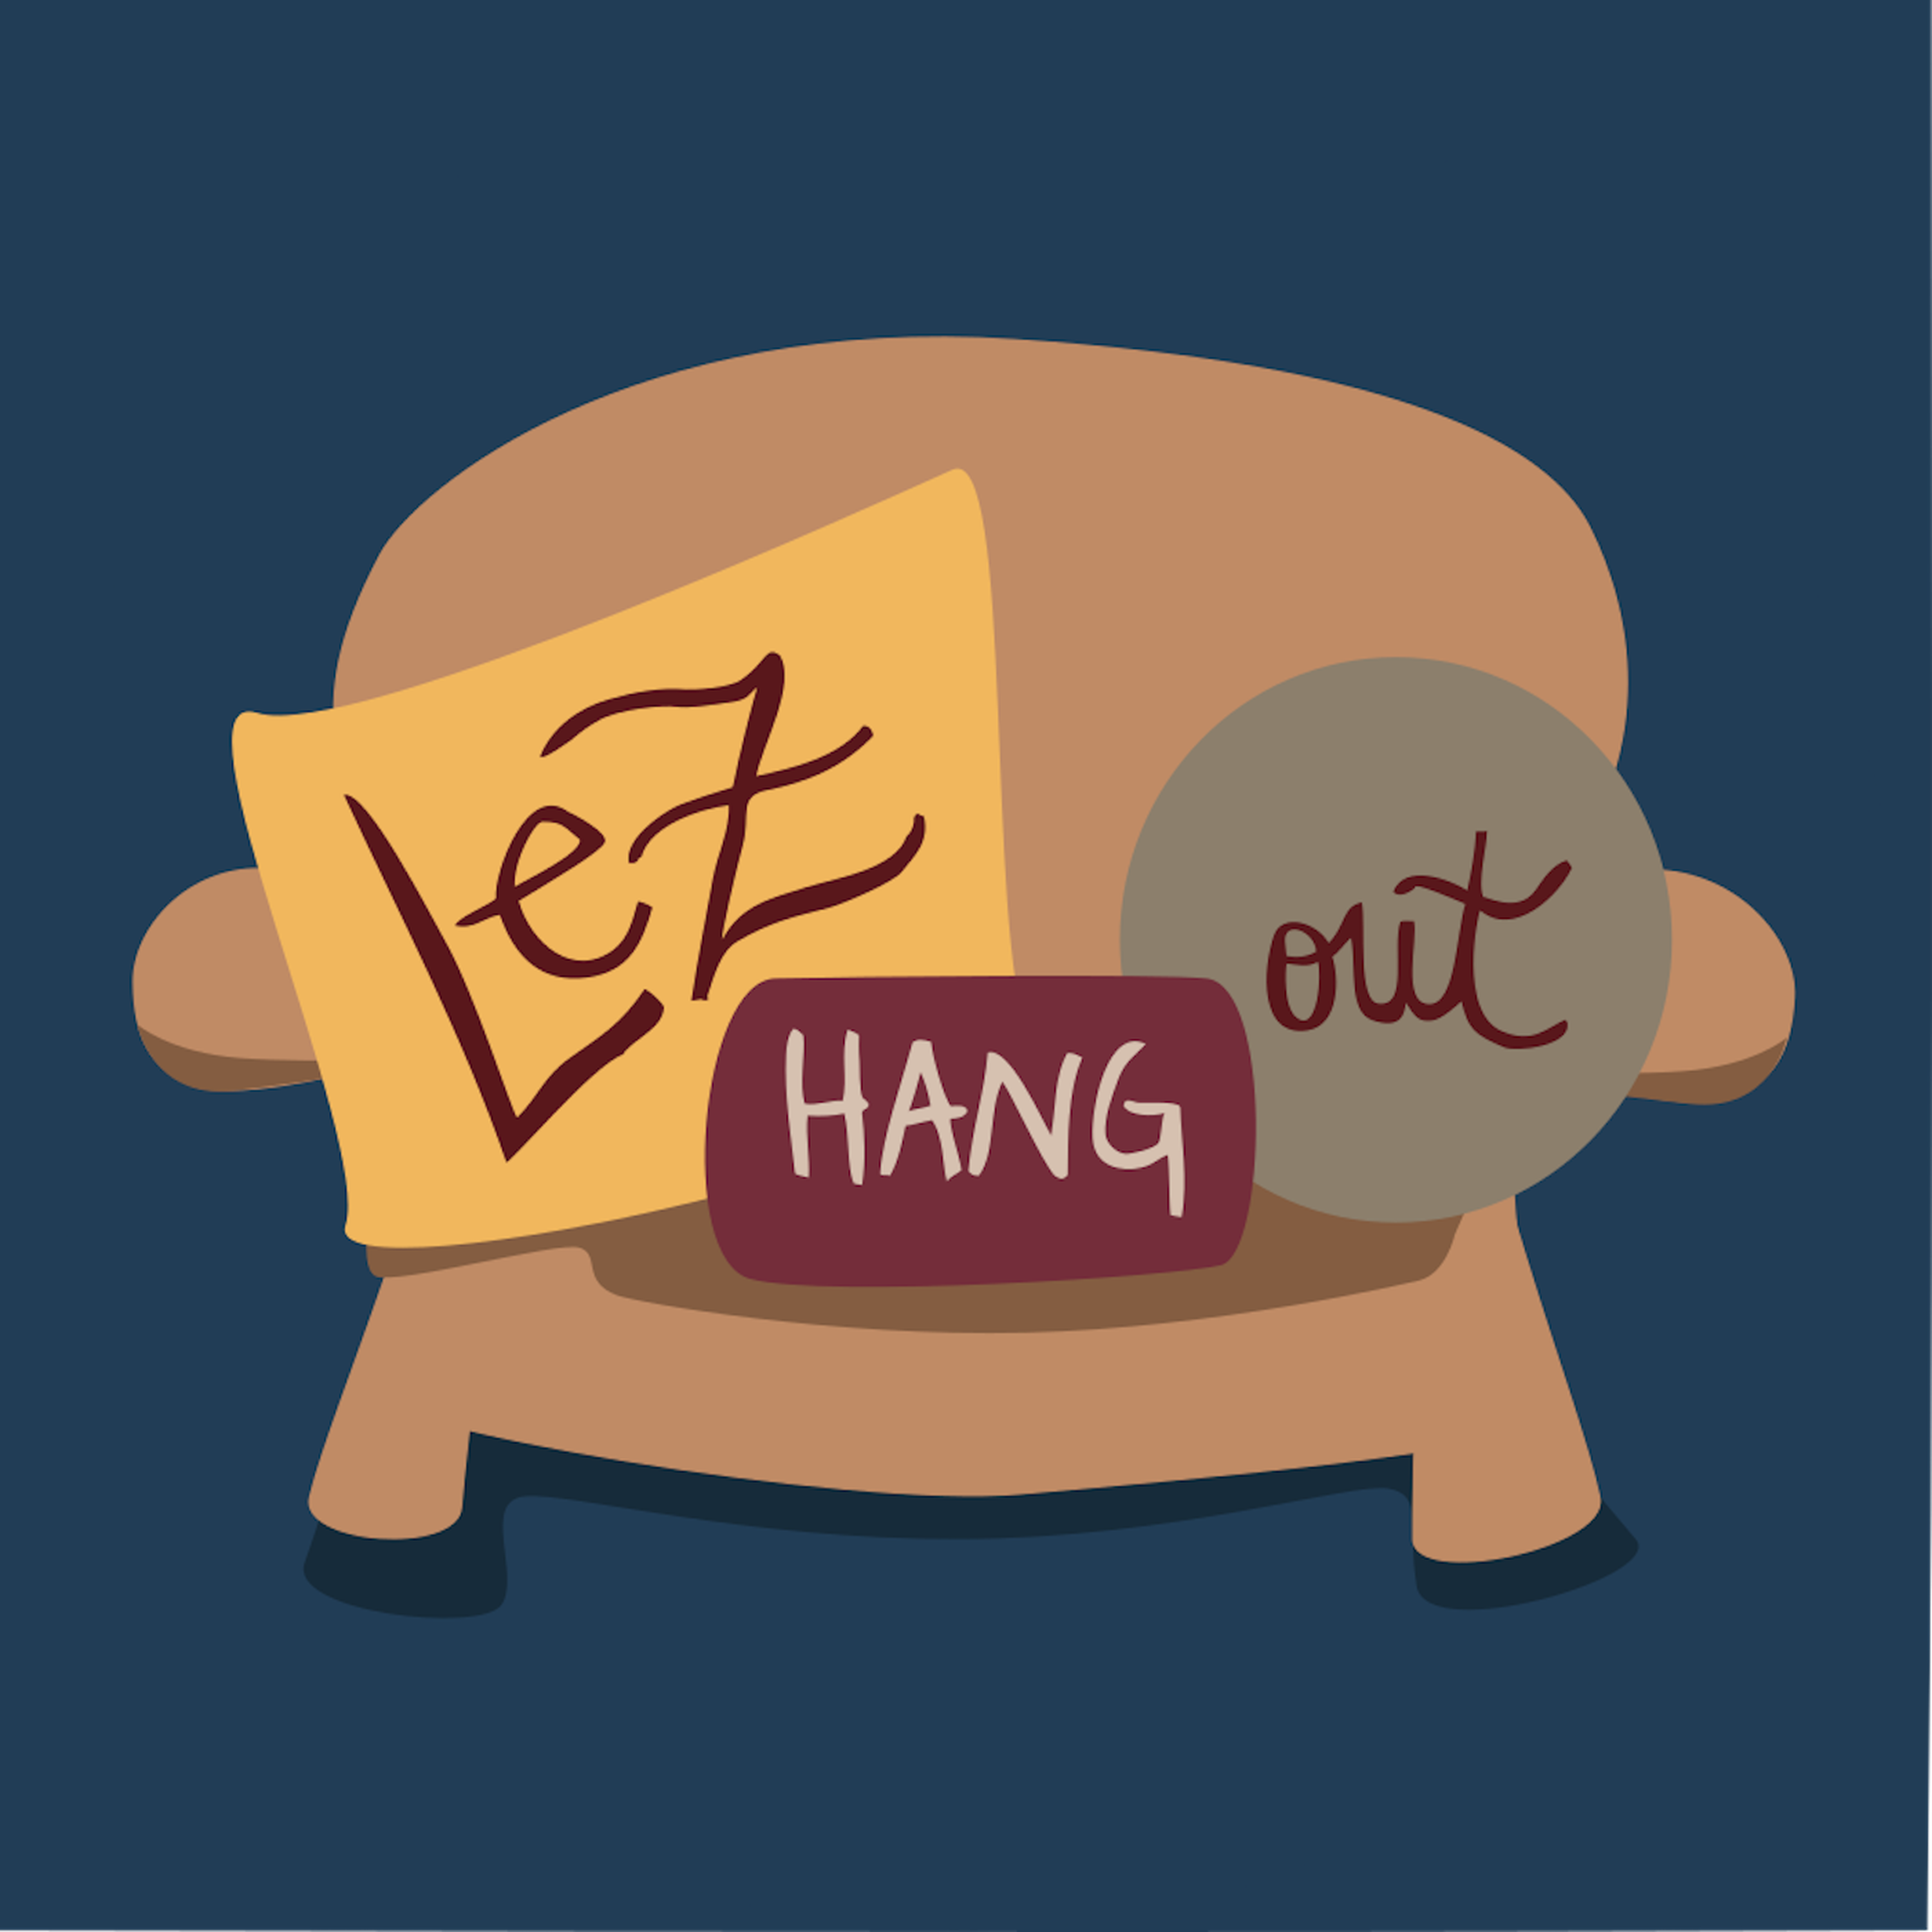 Lez Hang Out | A Lesbian Podcast - SBG 30: Live from WBUR City Space SBG Parent Trap, Captain Marvel and The Little Mermaid with Isha Patnaik and Marie Connor 